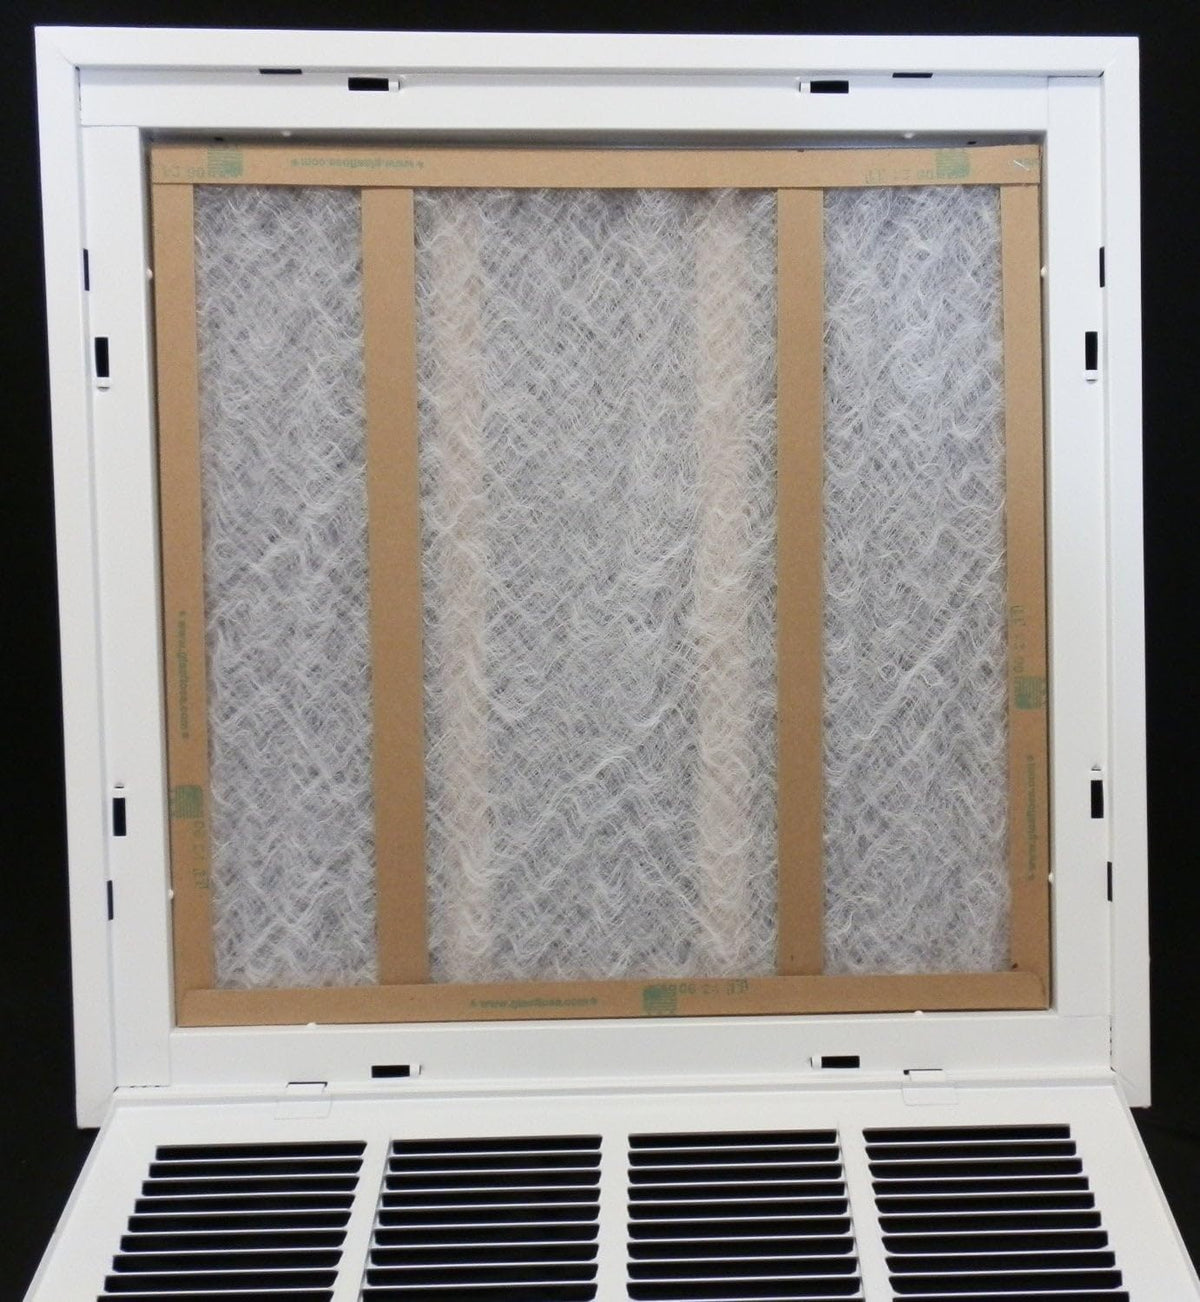 36&quot; X 32&quot; Steel Return Air Filter Grille for 1&quot; Filter - Removable Frame - [Outer Dimensions: 38 5/8&quot; X 34 5/8&quot;]